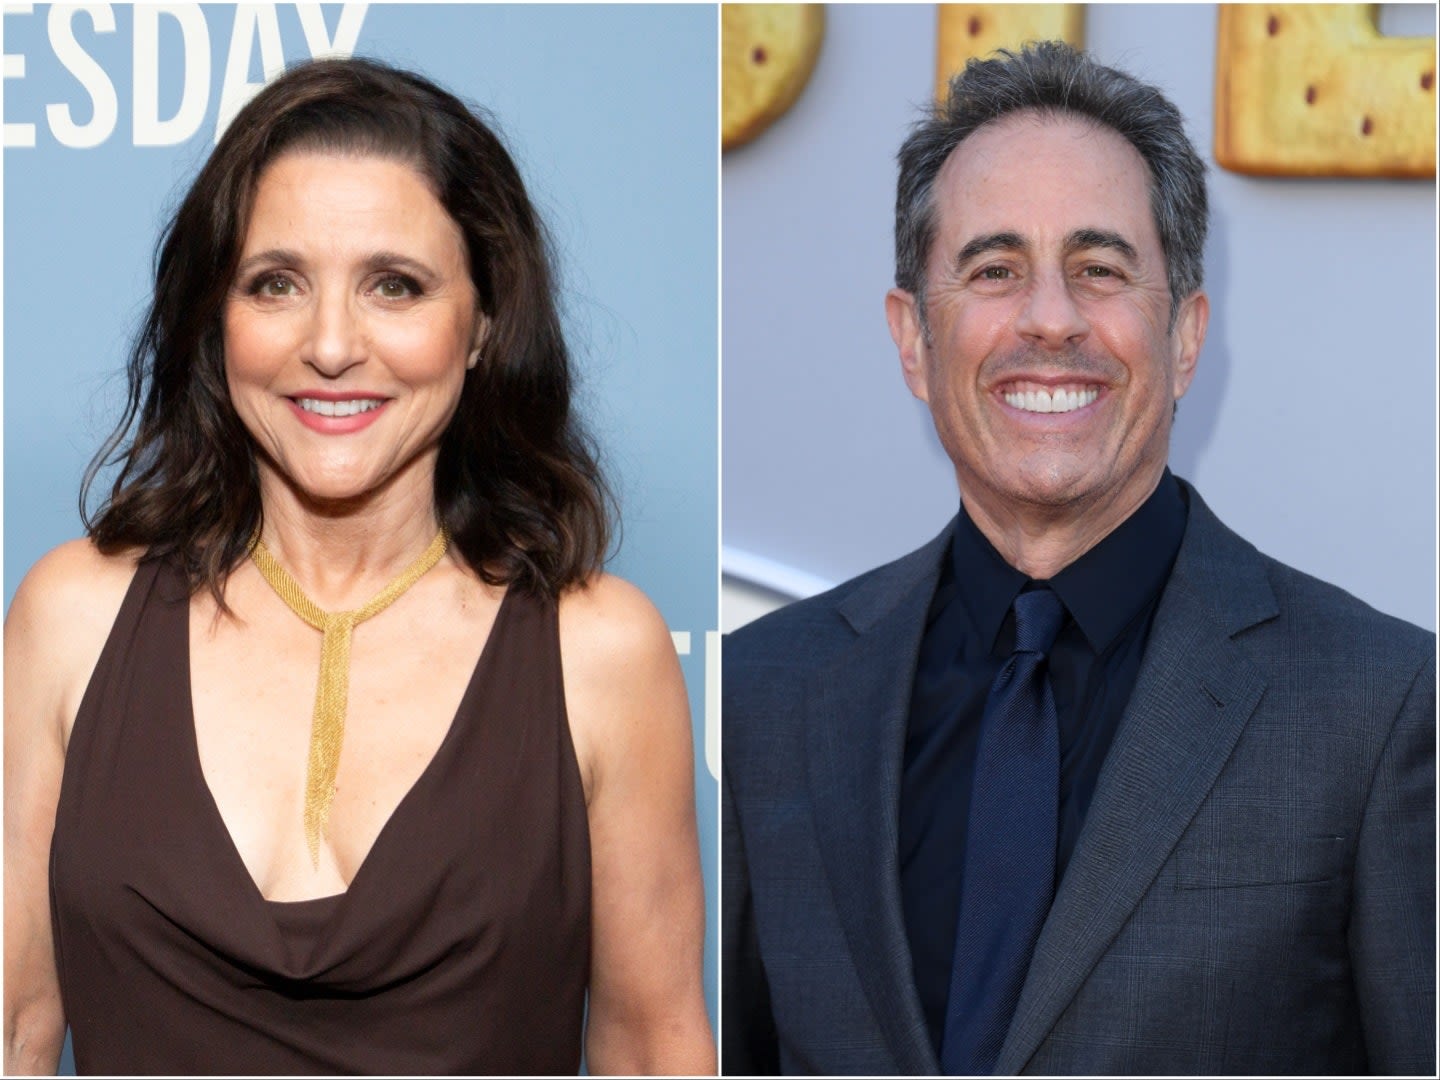 Julia Louis-Dreyfus Has the Perfect Response to Jerry Seinfeld’s Whining About Political Correctness